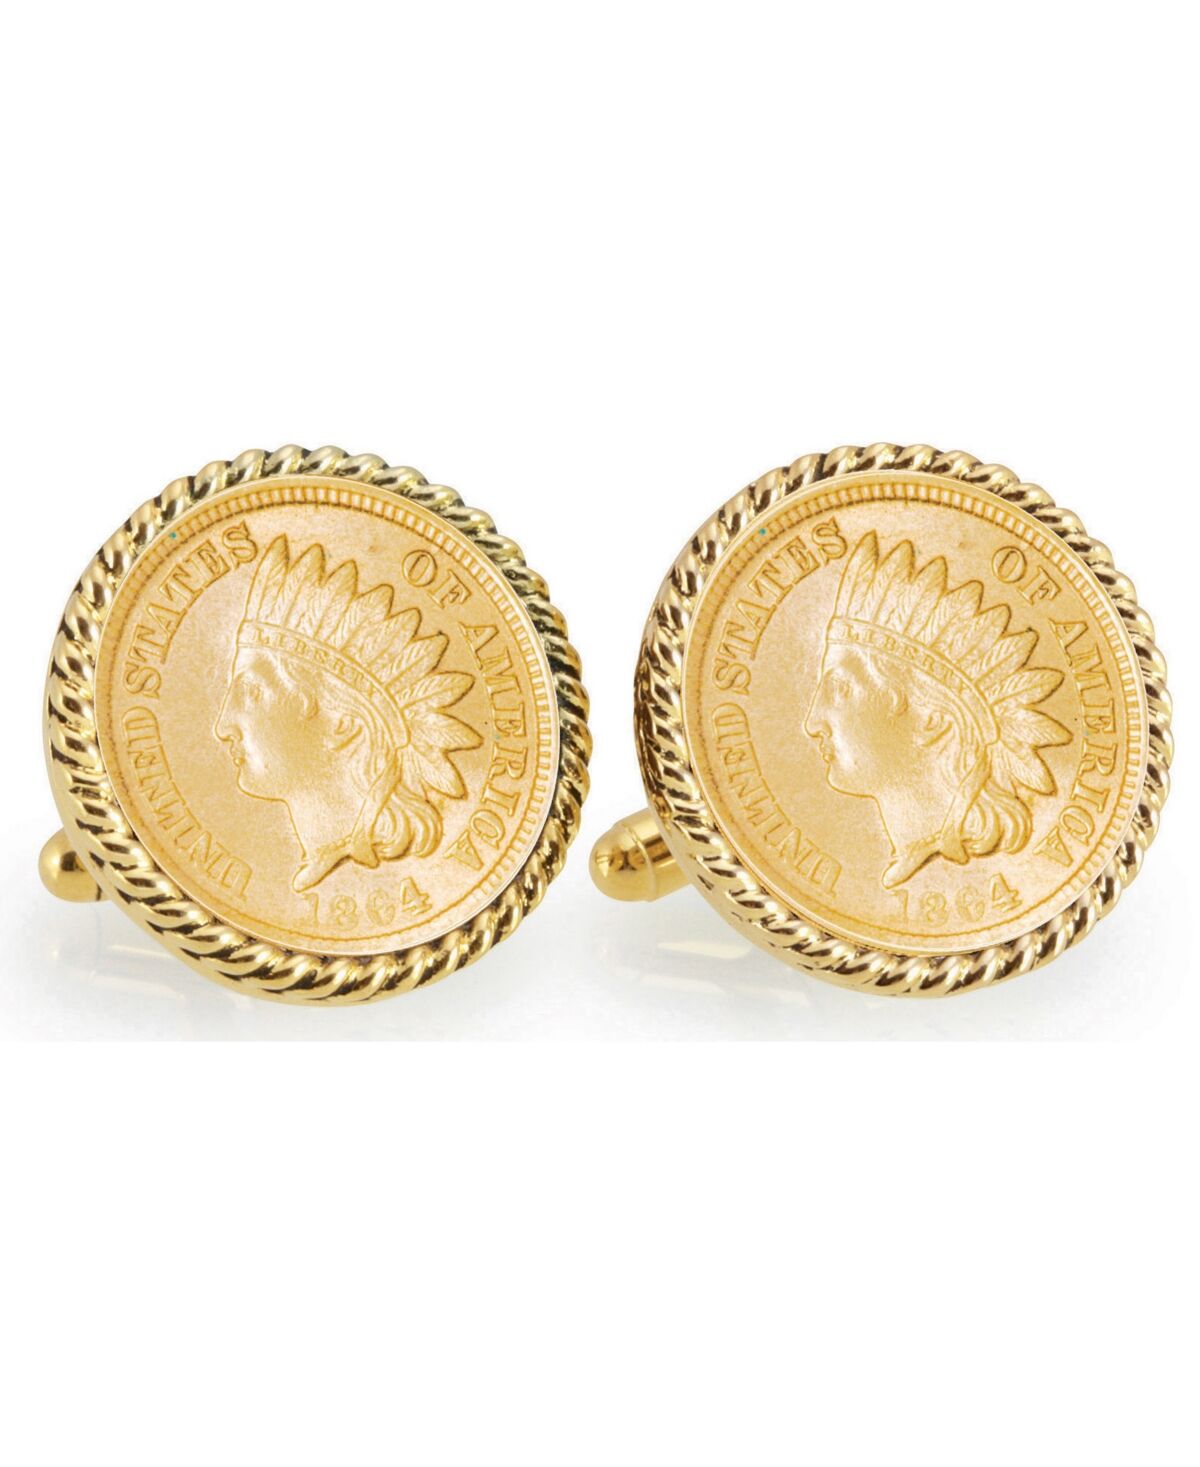 American Coin Treasures Gold-Layered Civil War Indian Head Penny Rope Bezel Coin Cuff Links - Gold